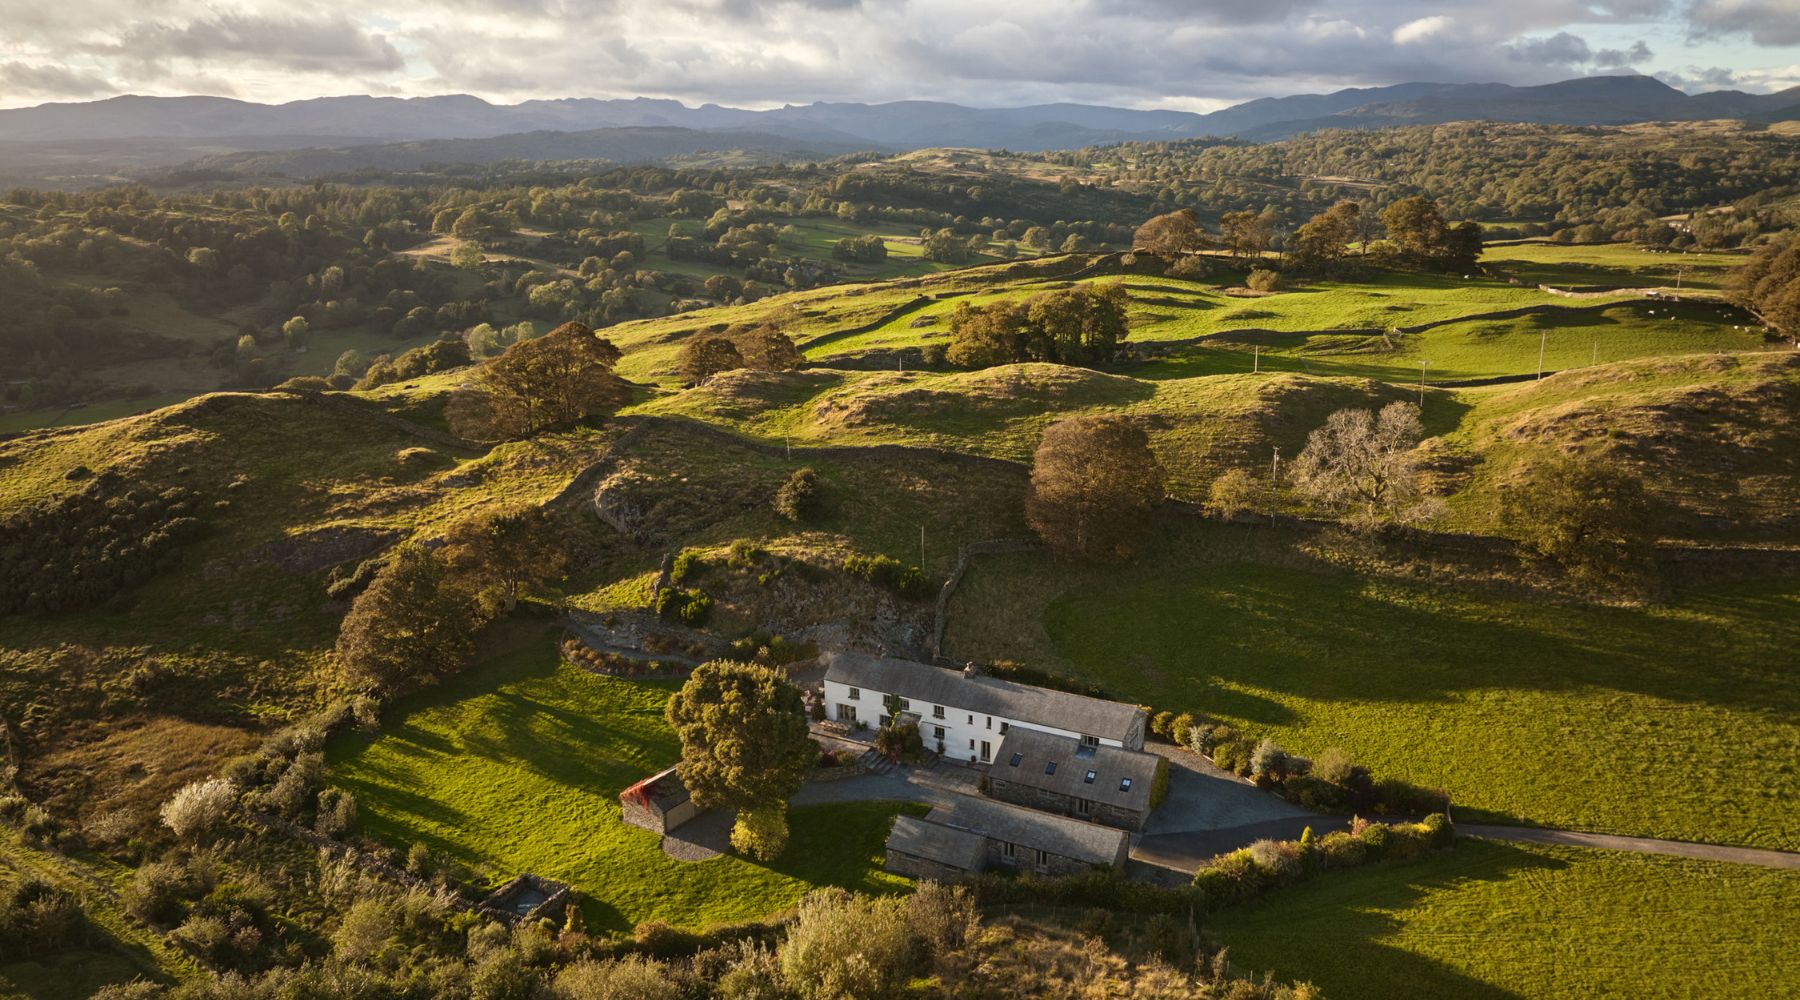 Omaze Million Pound House Lake District - Ariel shot of the cottage surrounded by green hilly fields